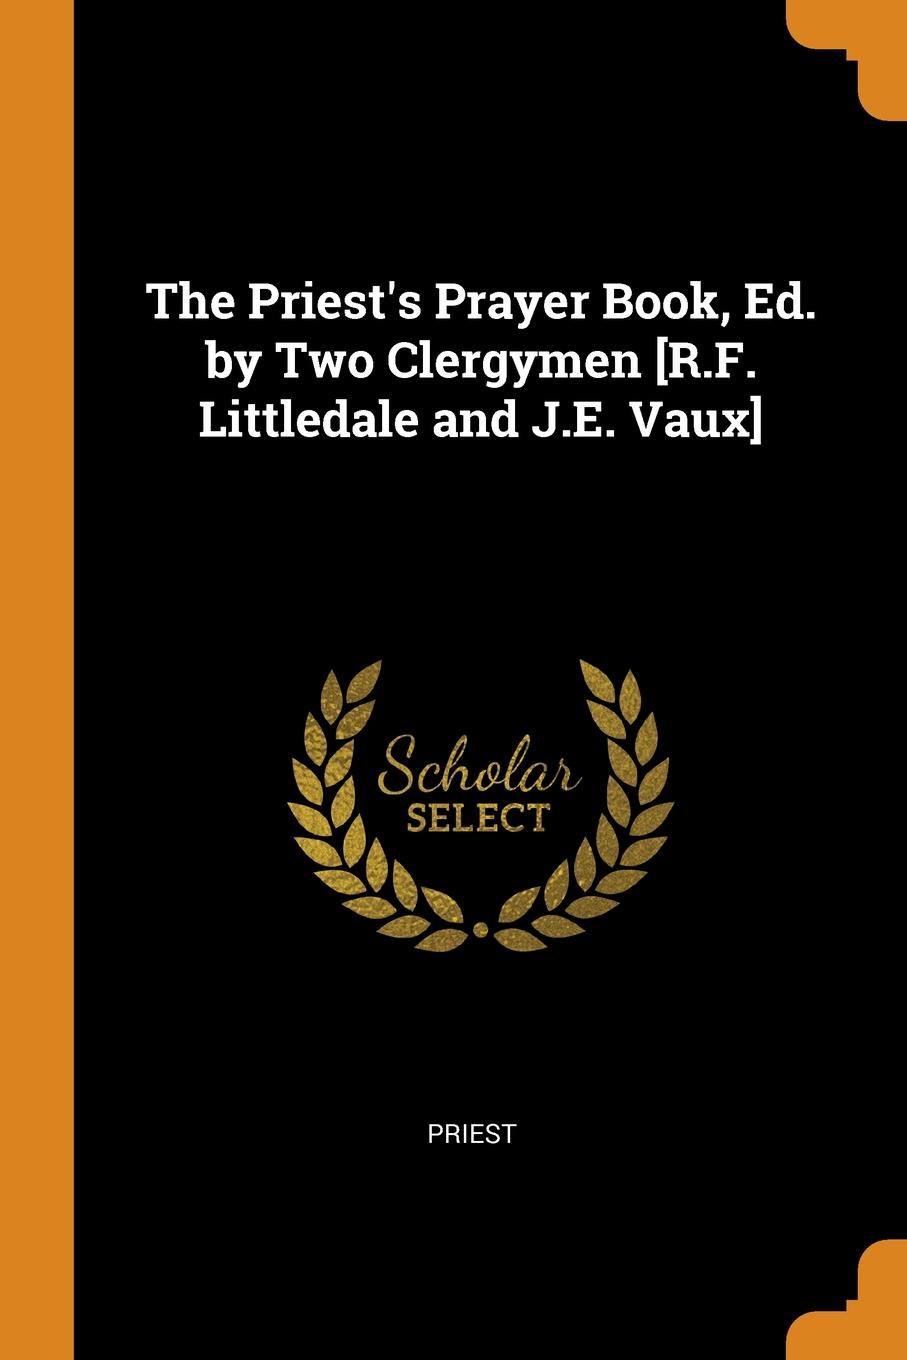 The Priest.s Prayer Book, Ed. by Two Clergymen .R.F. Littledale and J.E. Vaux.